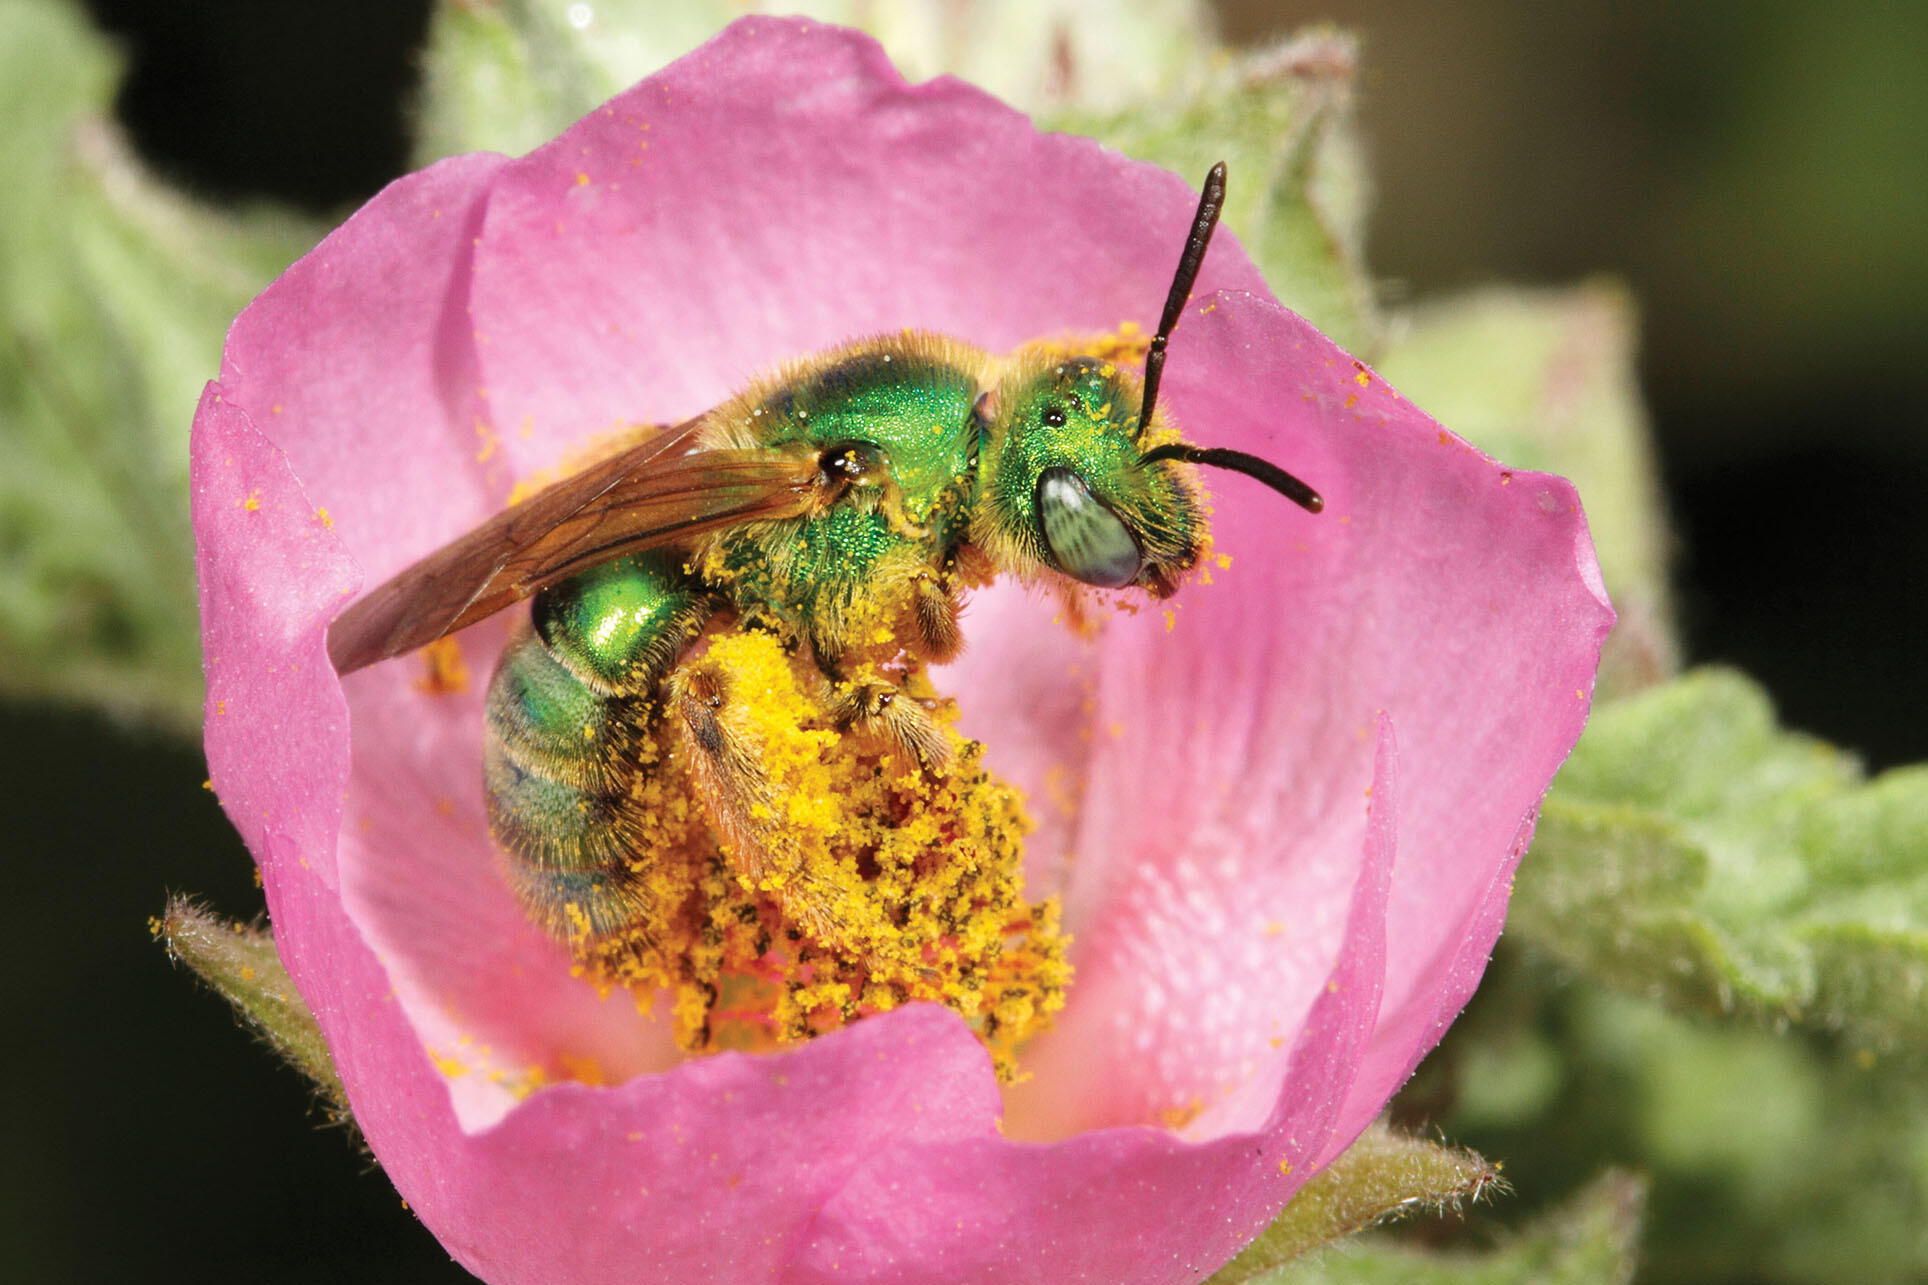 A female ultra green sweat bee covered in yellow pollen. (Photo by Rollin Coville.)